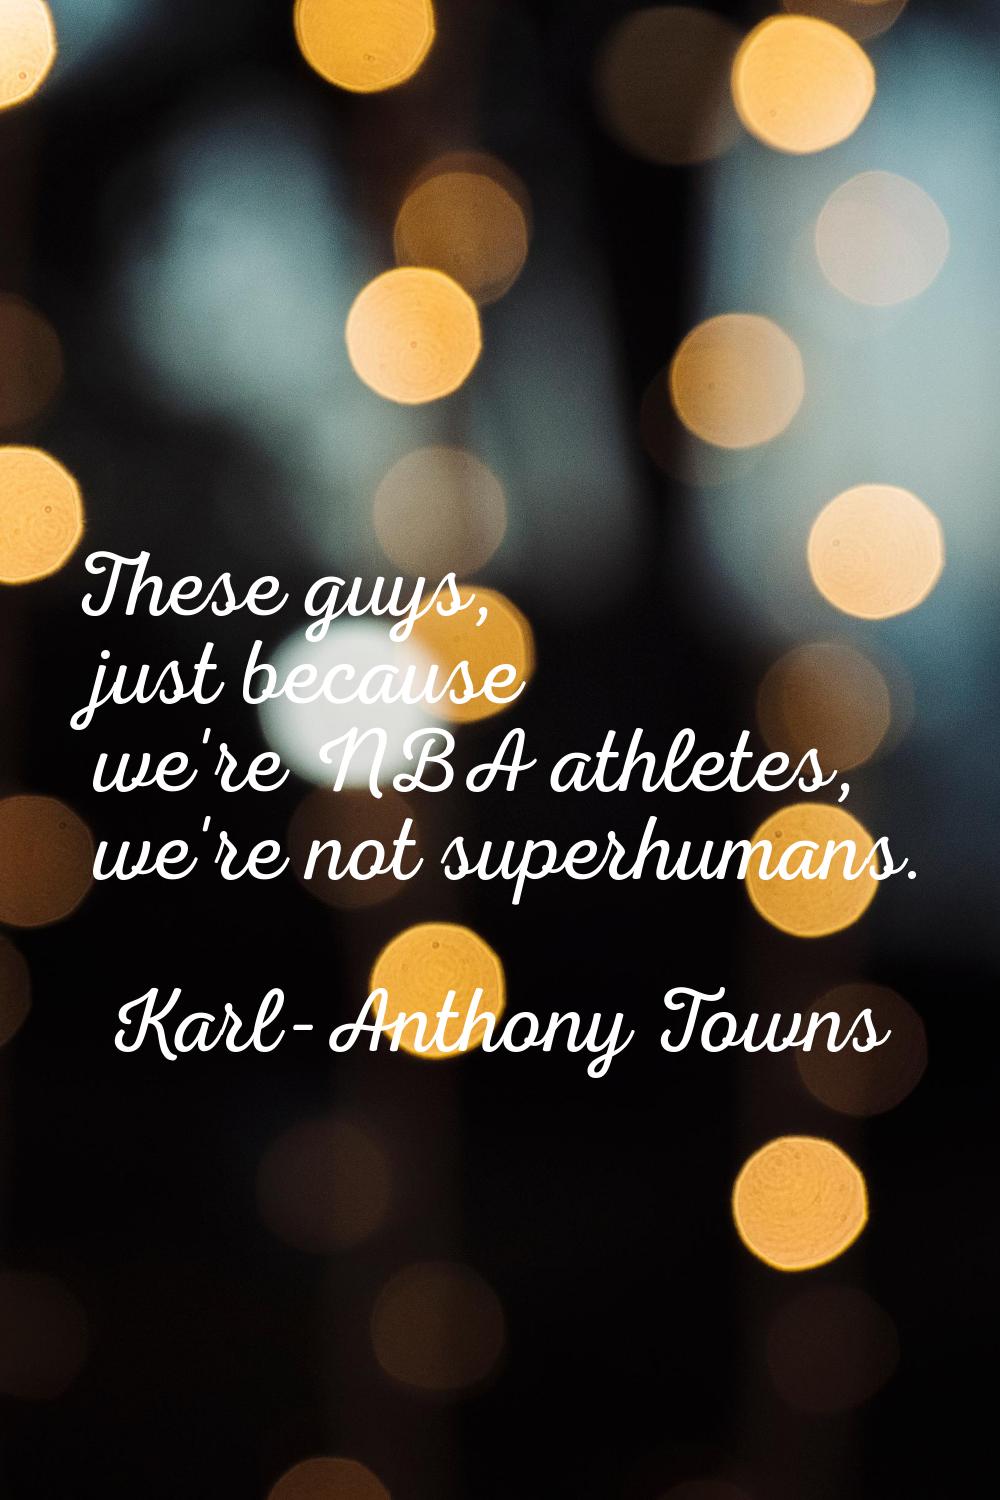 These guys, just because we're NBA athletes, we're not superhumans.